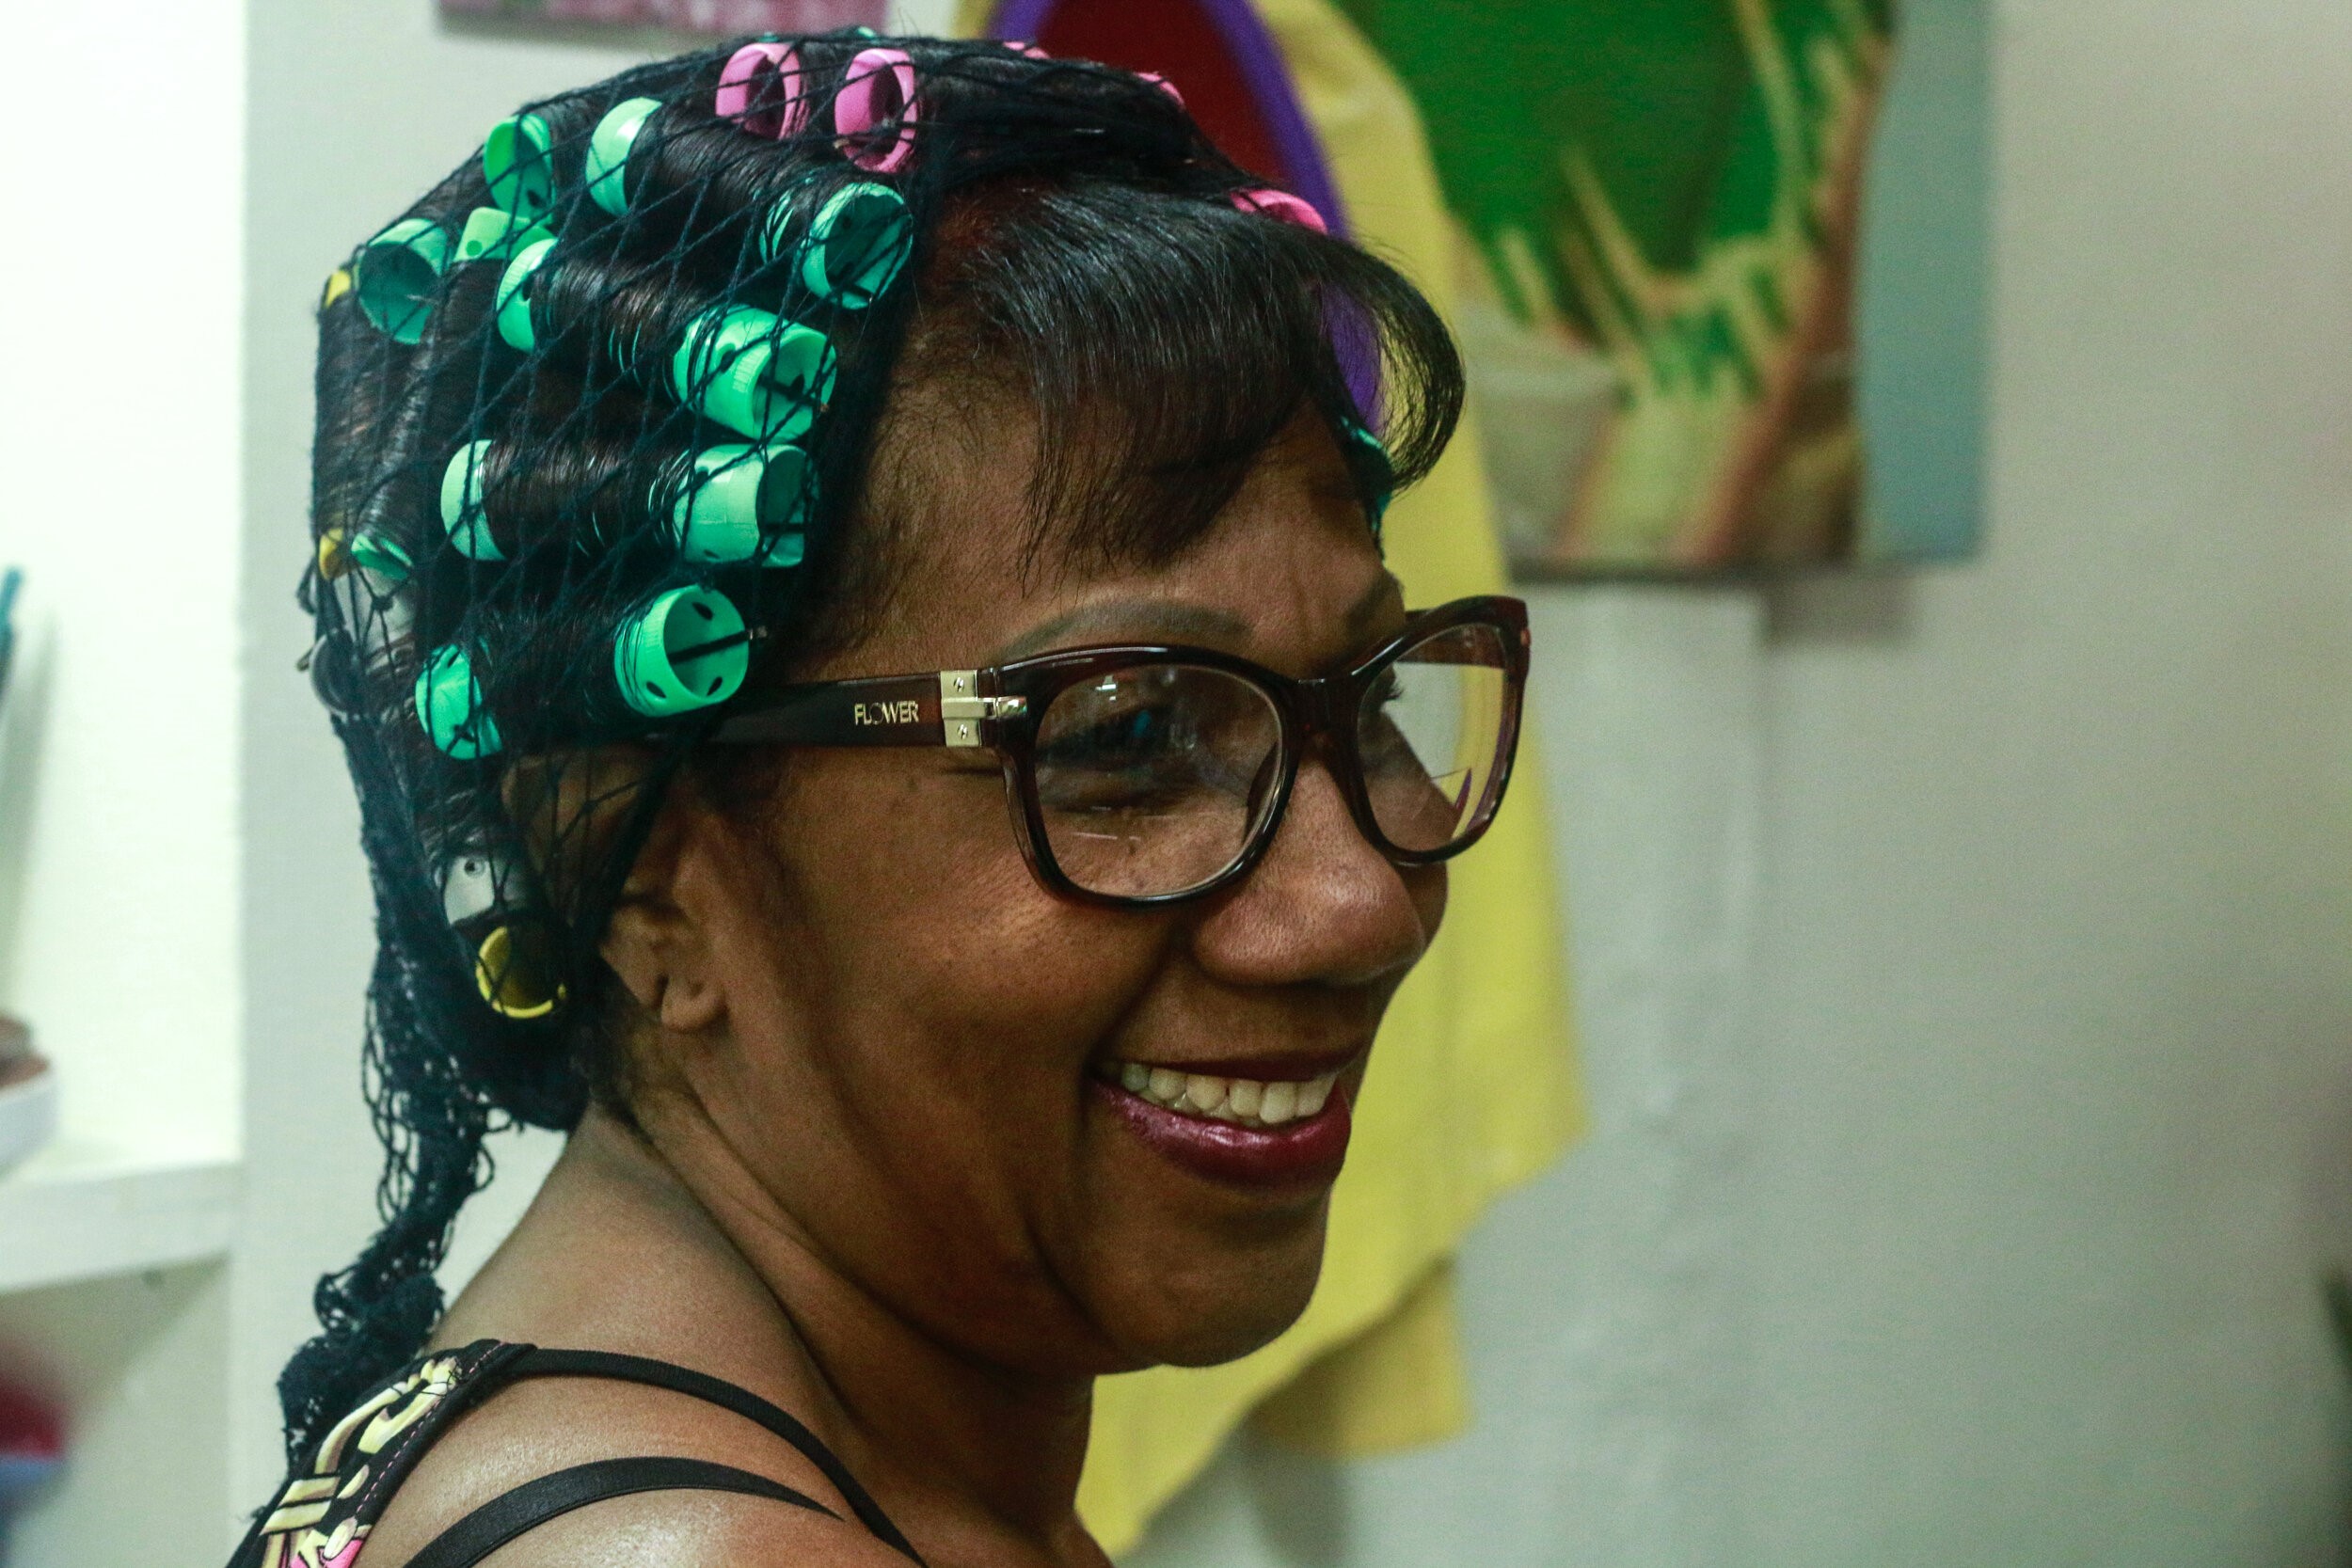 Image from Dominican-Puerto Rican artist Ojos Nebulosos’ photo essay “Quisqueyanas: Ferminas Salón.” Features a smiling woman in glasses with curlers in her hair.